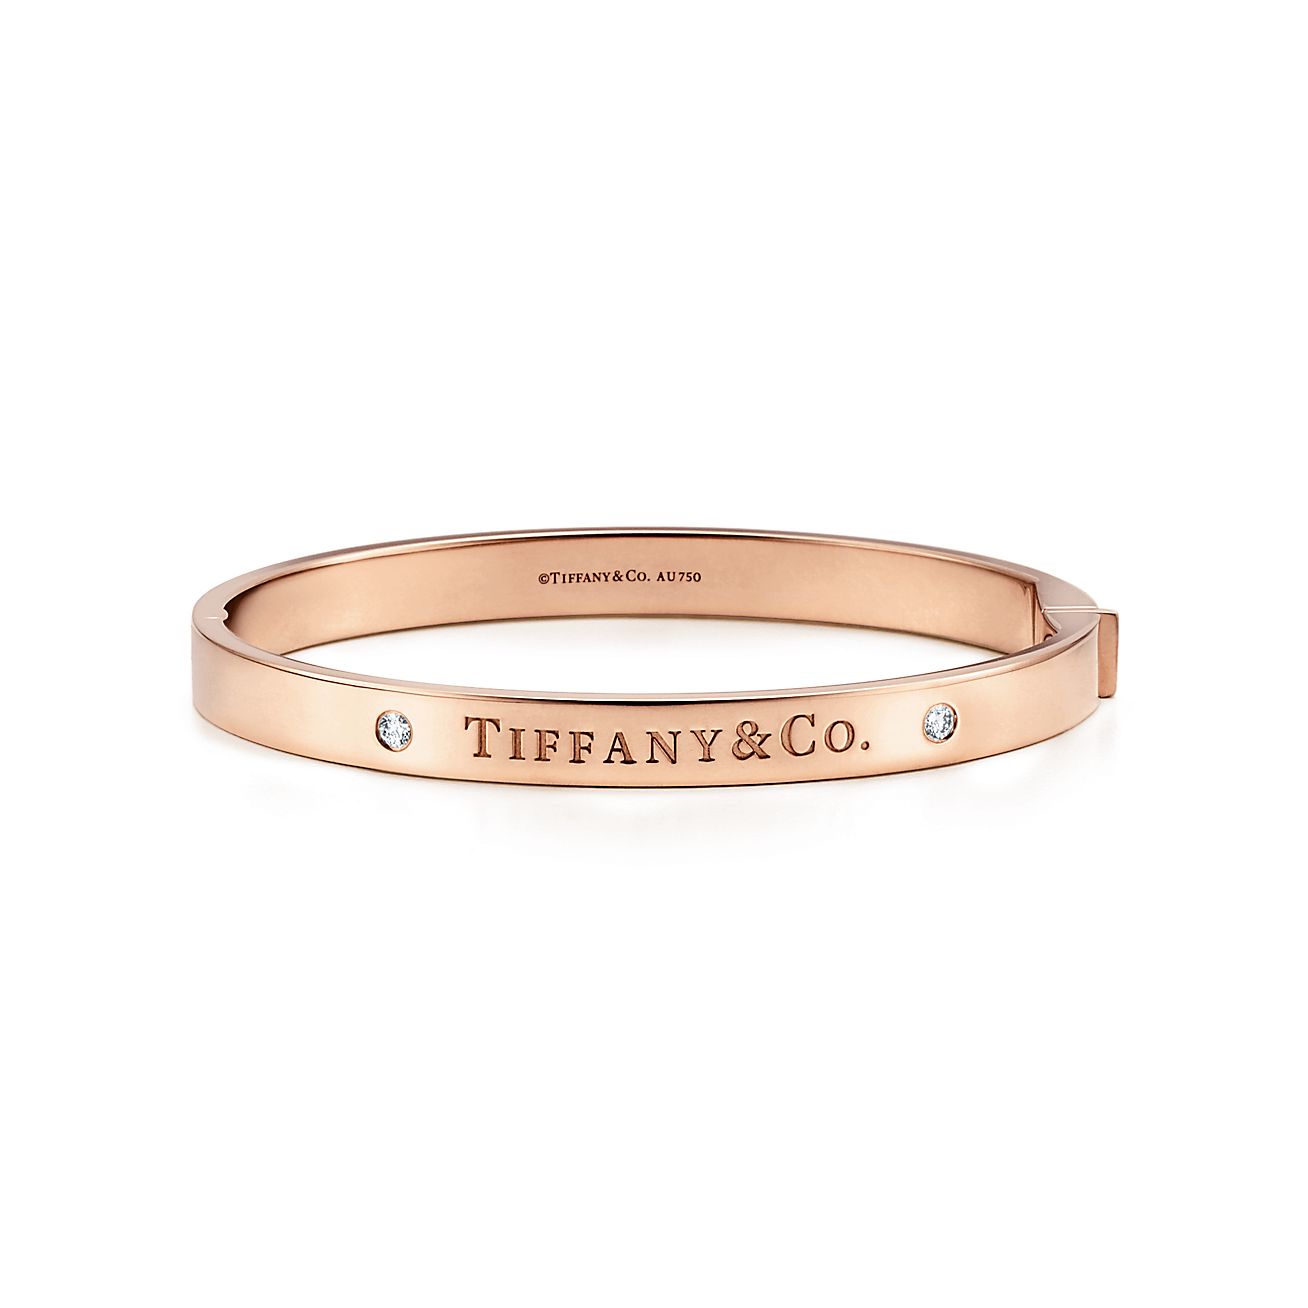 Hinged bangle in 18k rose gold with 